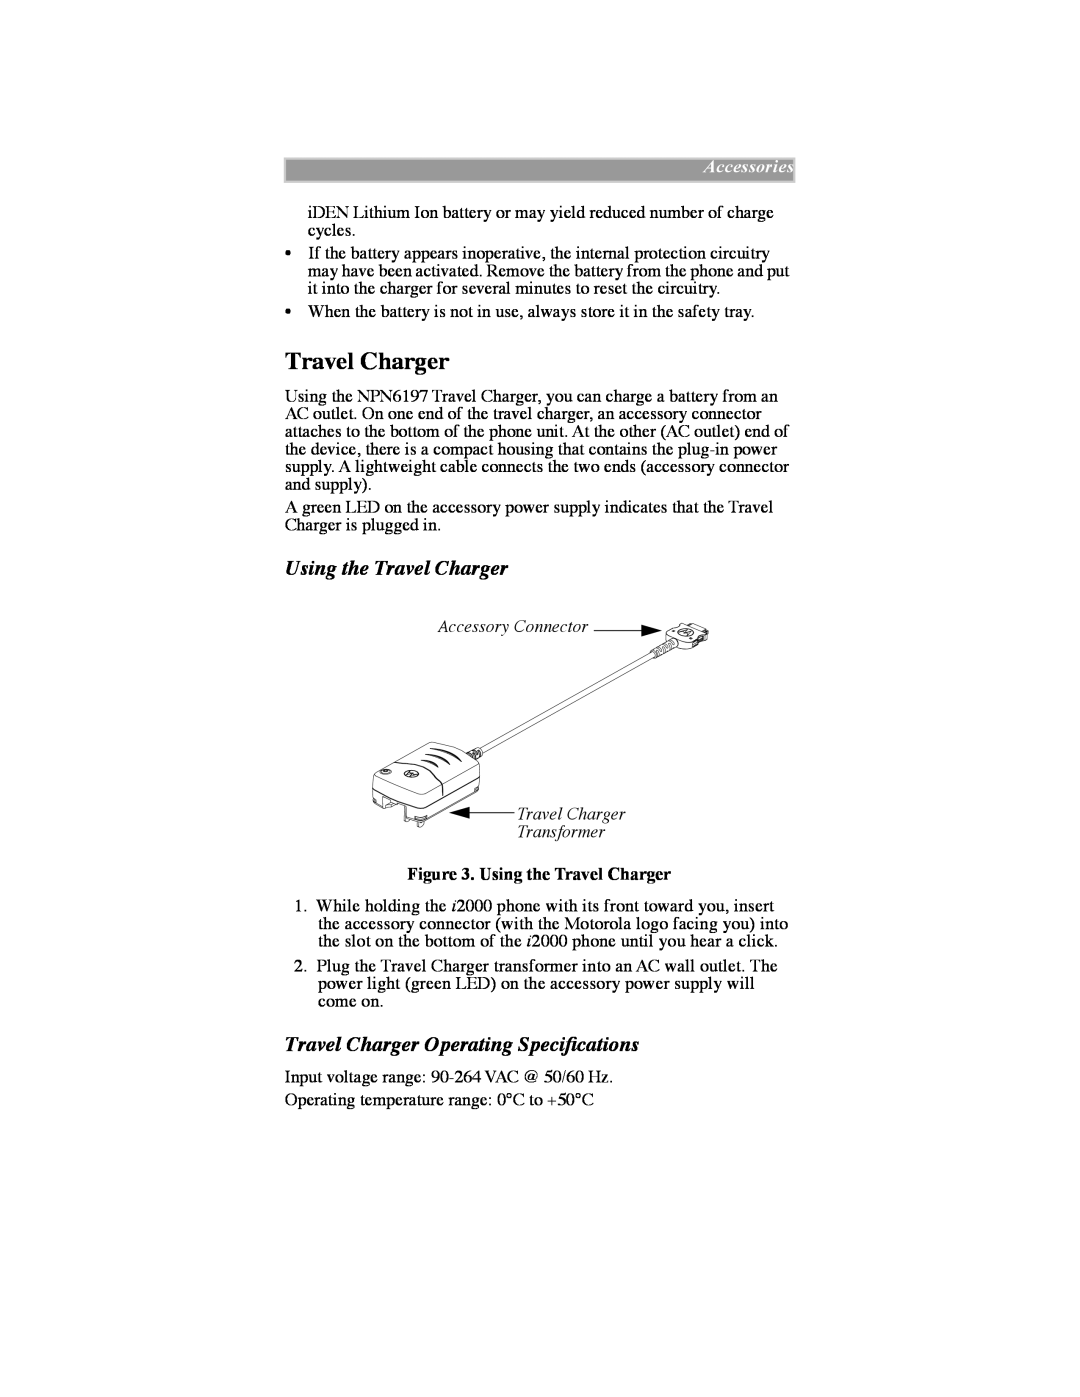 Motorola iDEN manual Using the Travel Charger, Travel Charger Operating SpeciÞcations, Accessories 